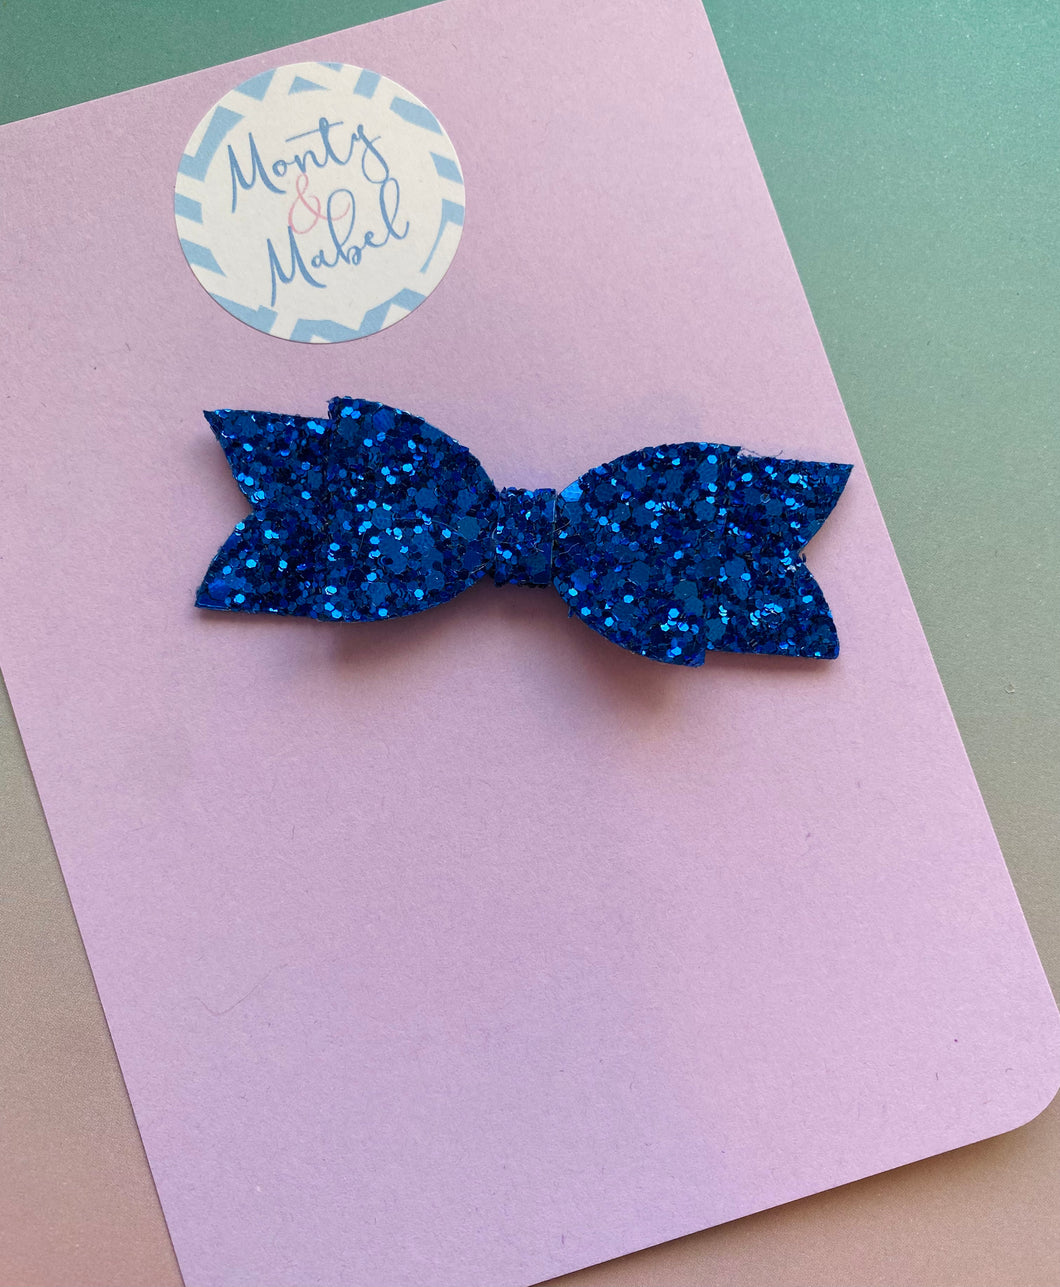 Sale: Royal Blue Glitter Small Bow